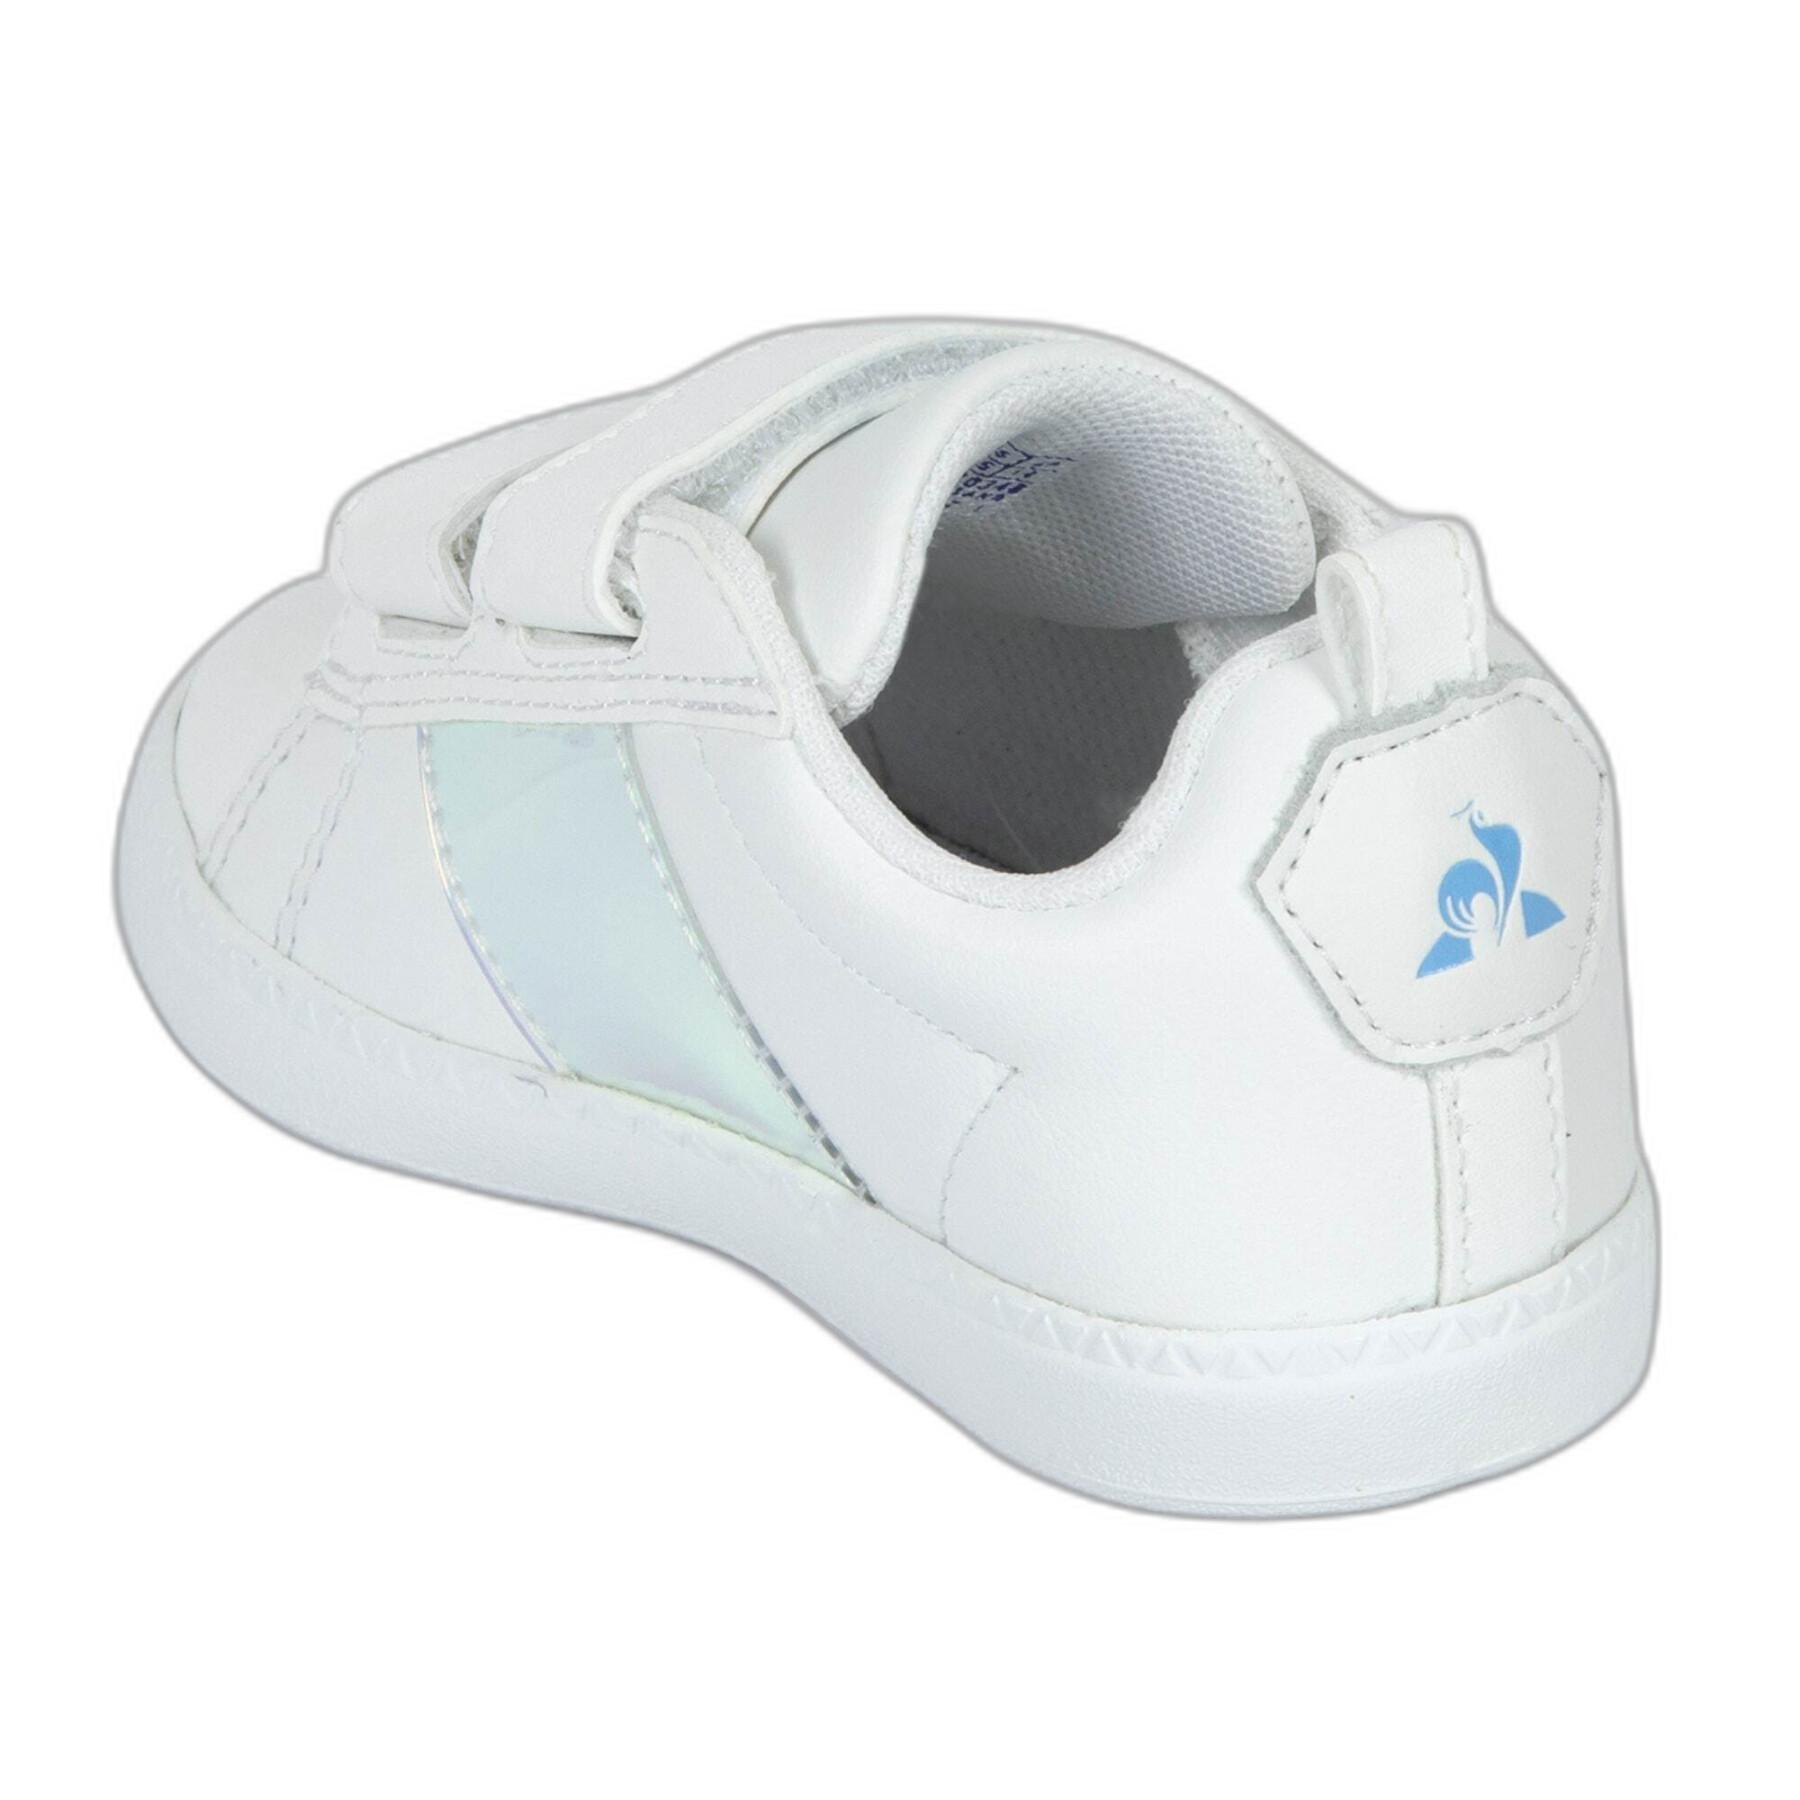 Children's sneakers Le Coq Sportif Courtclassic Inf Iridescent